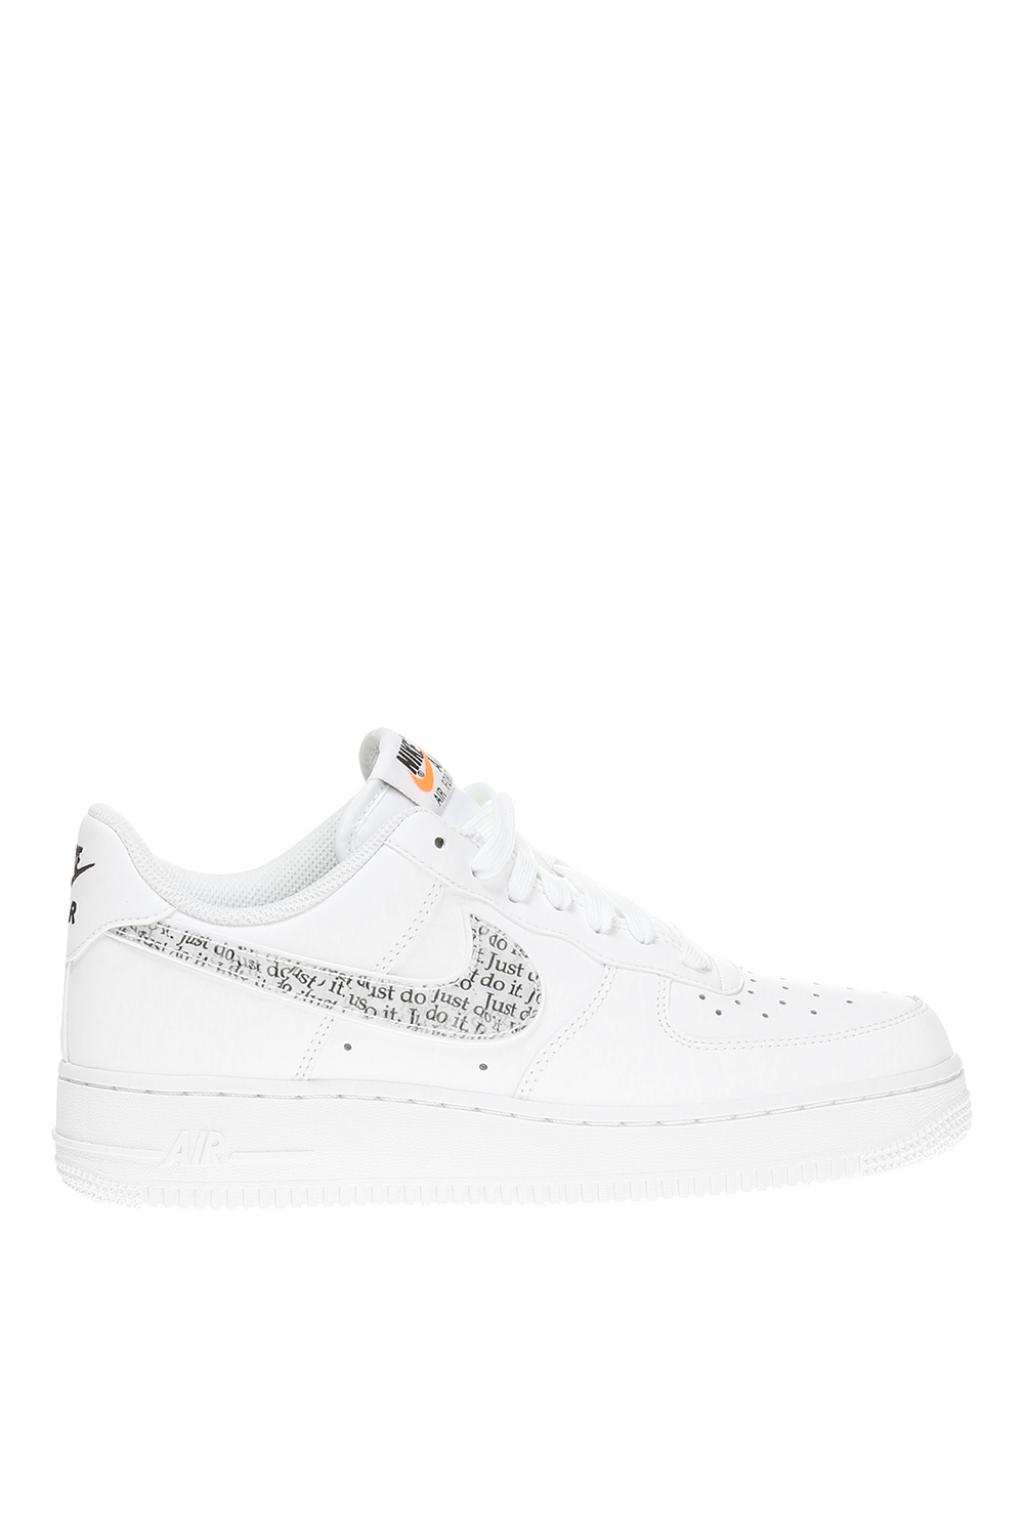 white air force 1 07 lv8 jdi trainers